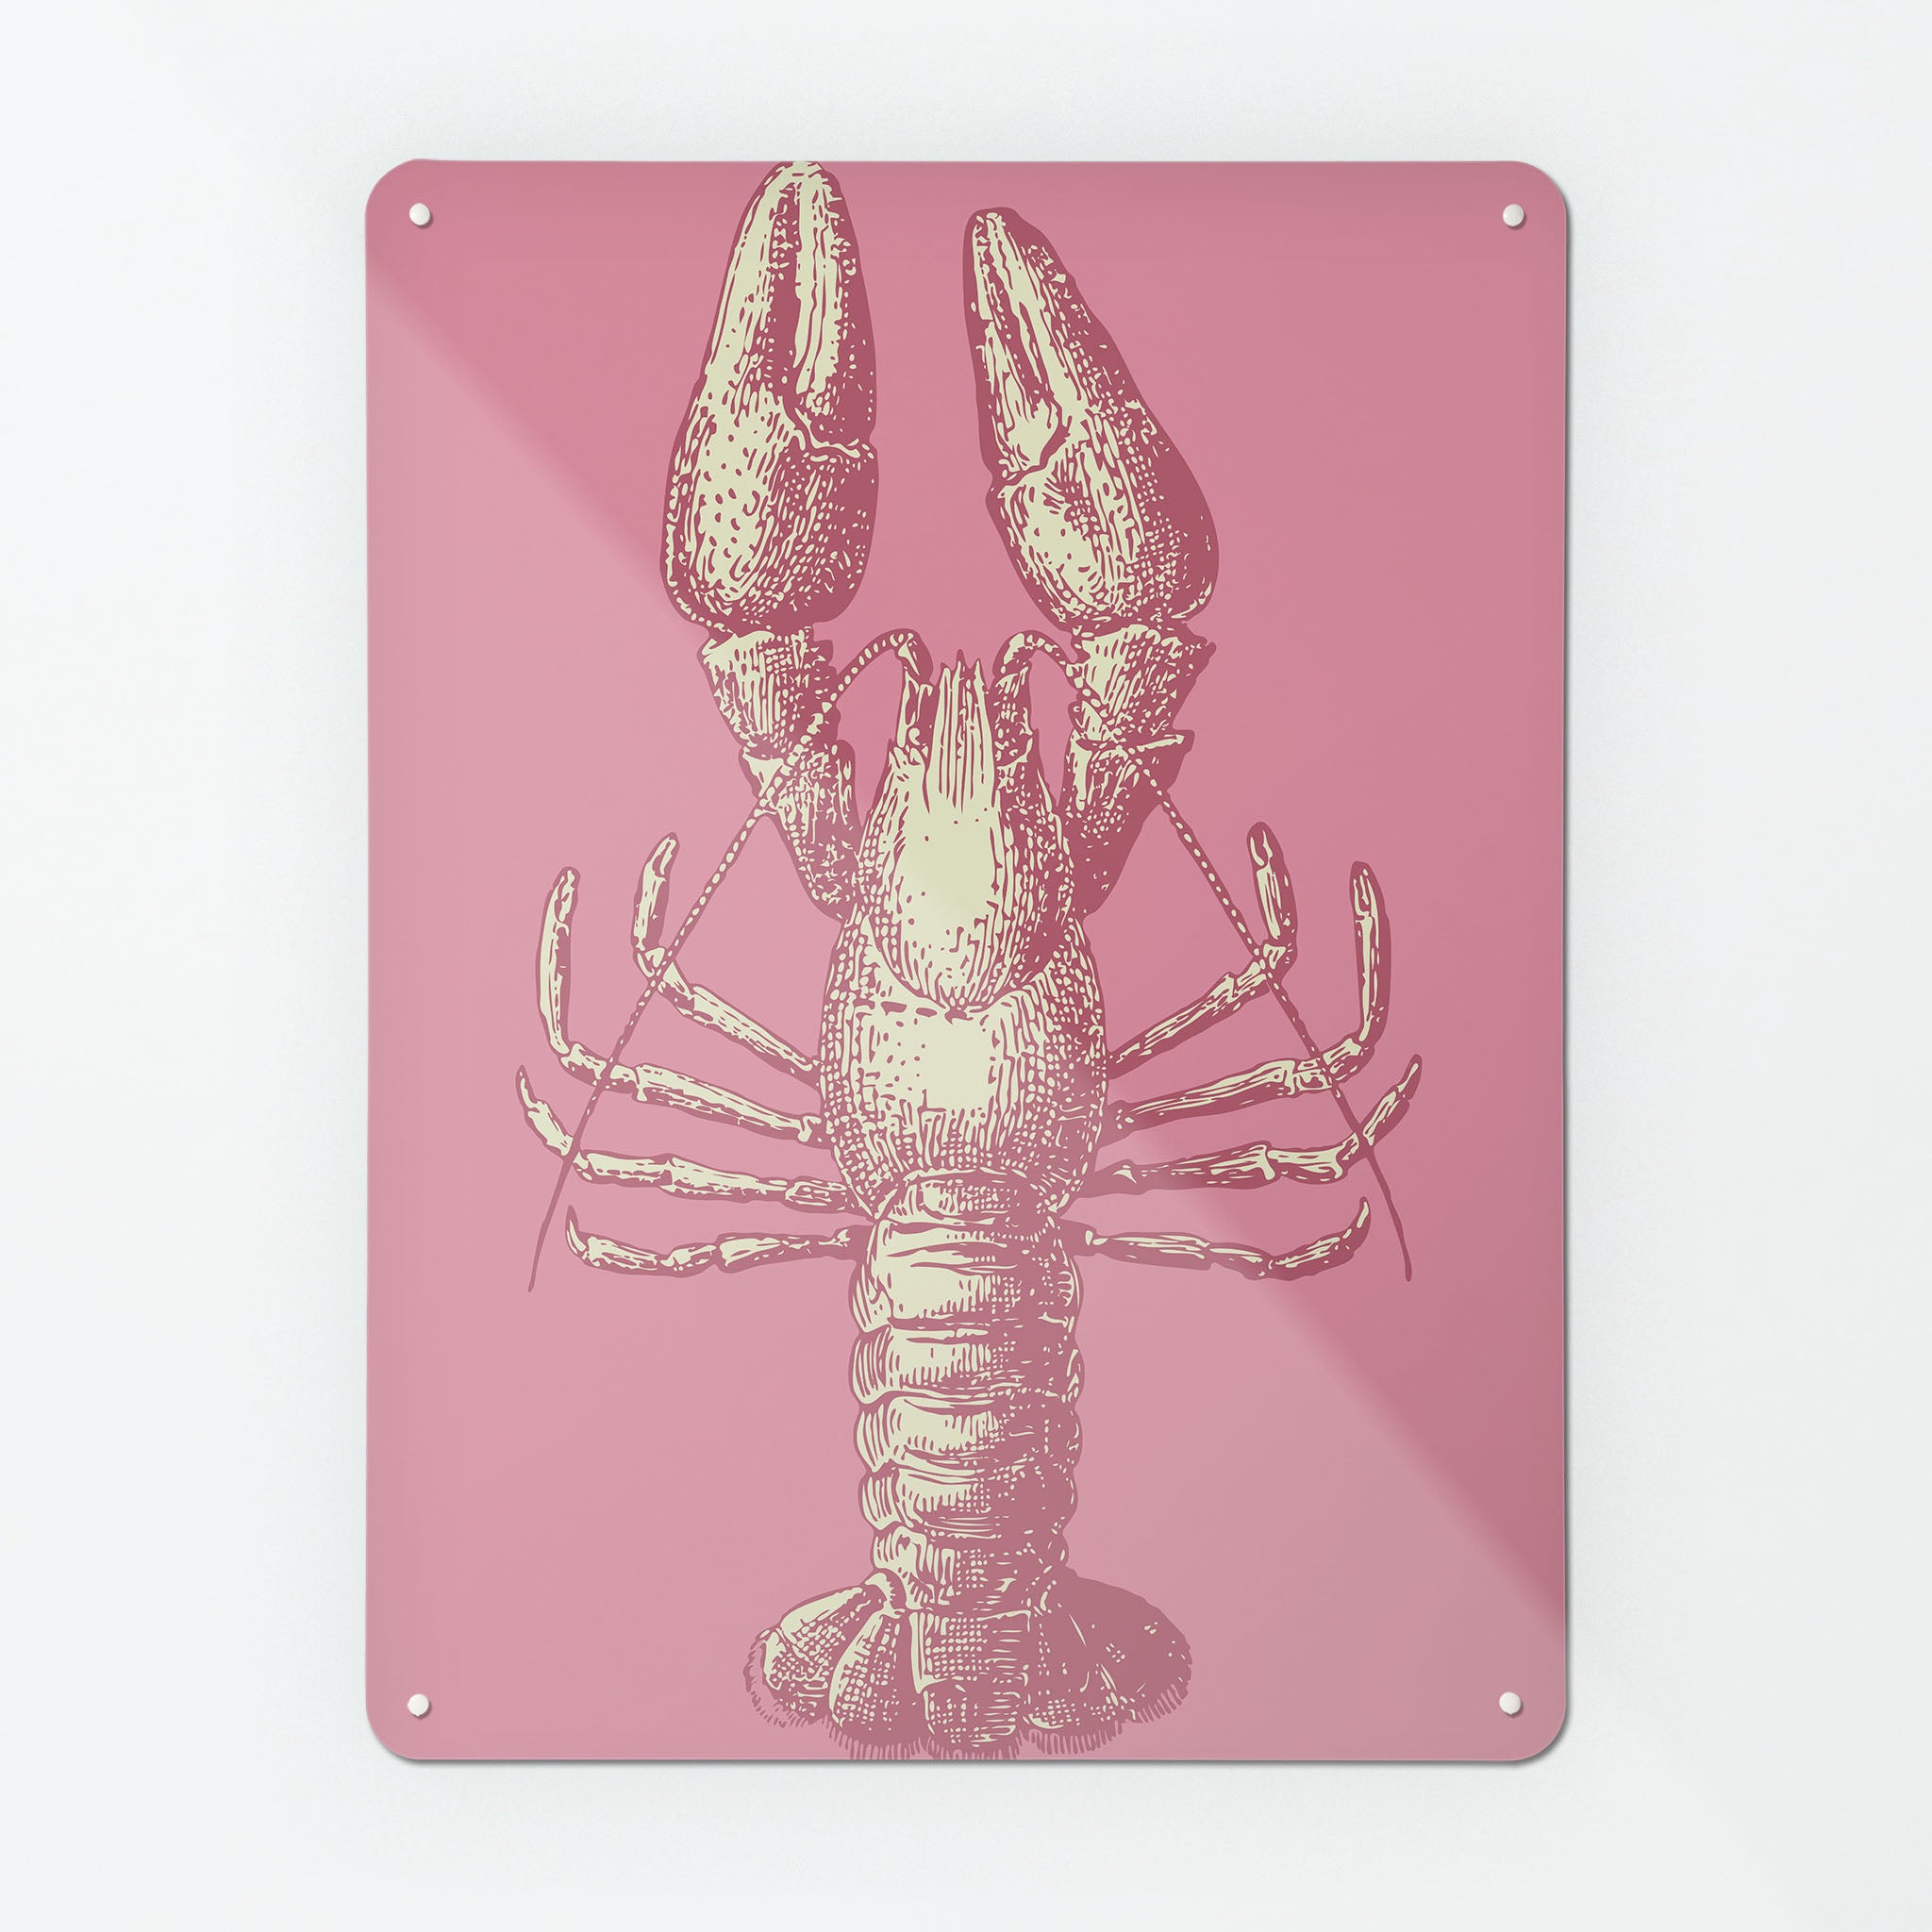 A large magnetic notice board by Beyond the Fridge with an image of a lobster illustration on an pink background